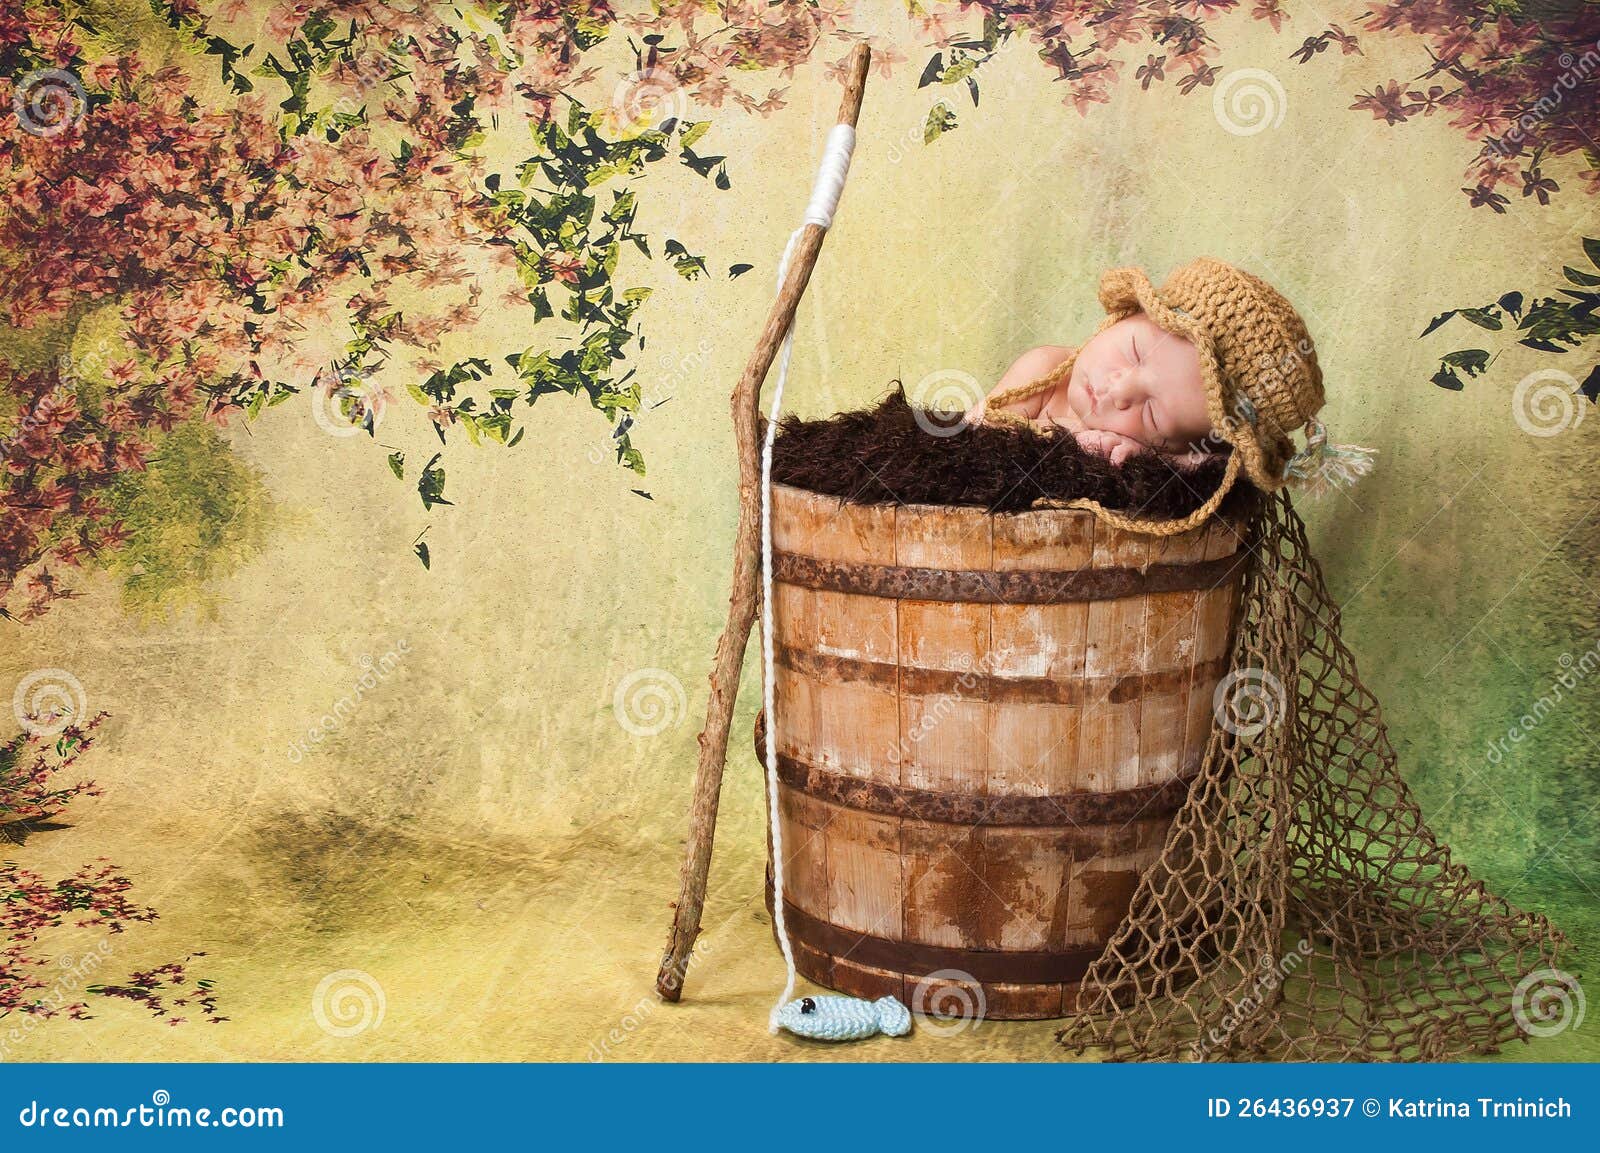 Newborn Baby Boy with Fishing Hat and Pole Stock Image - Image of